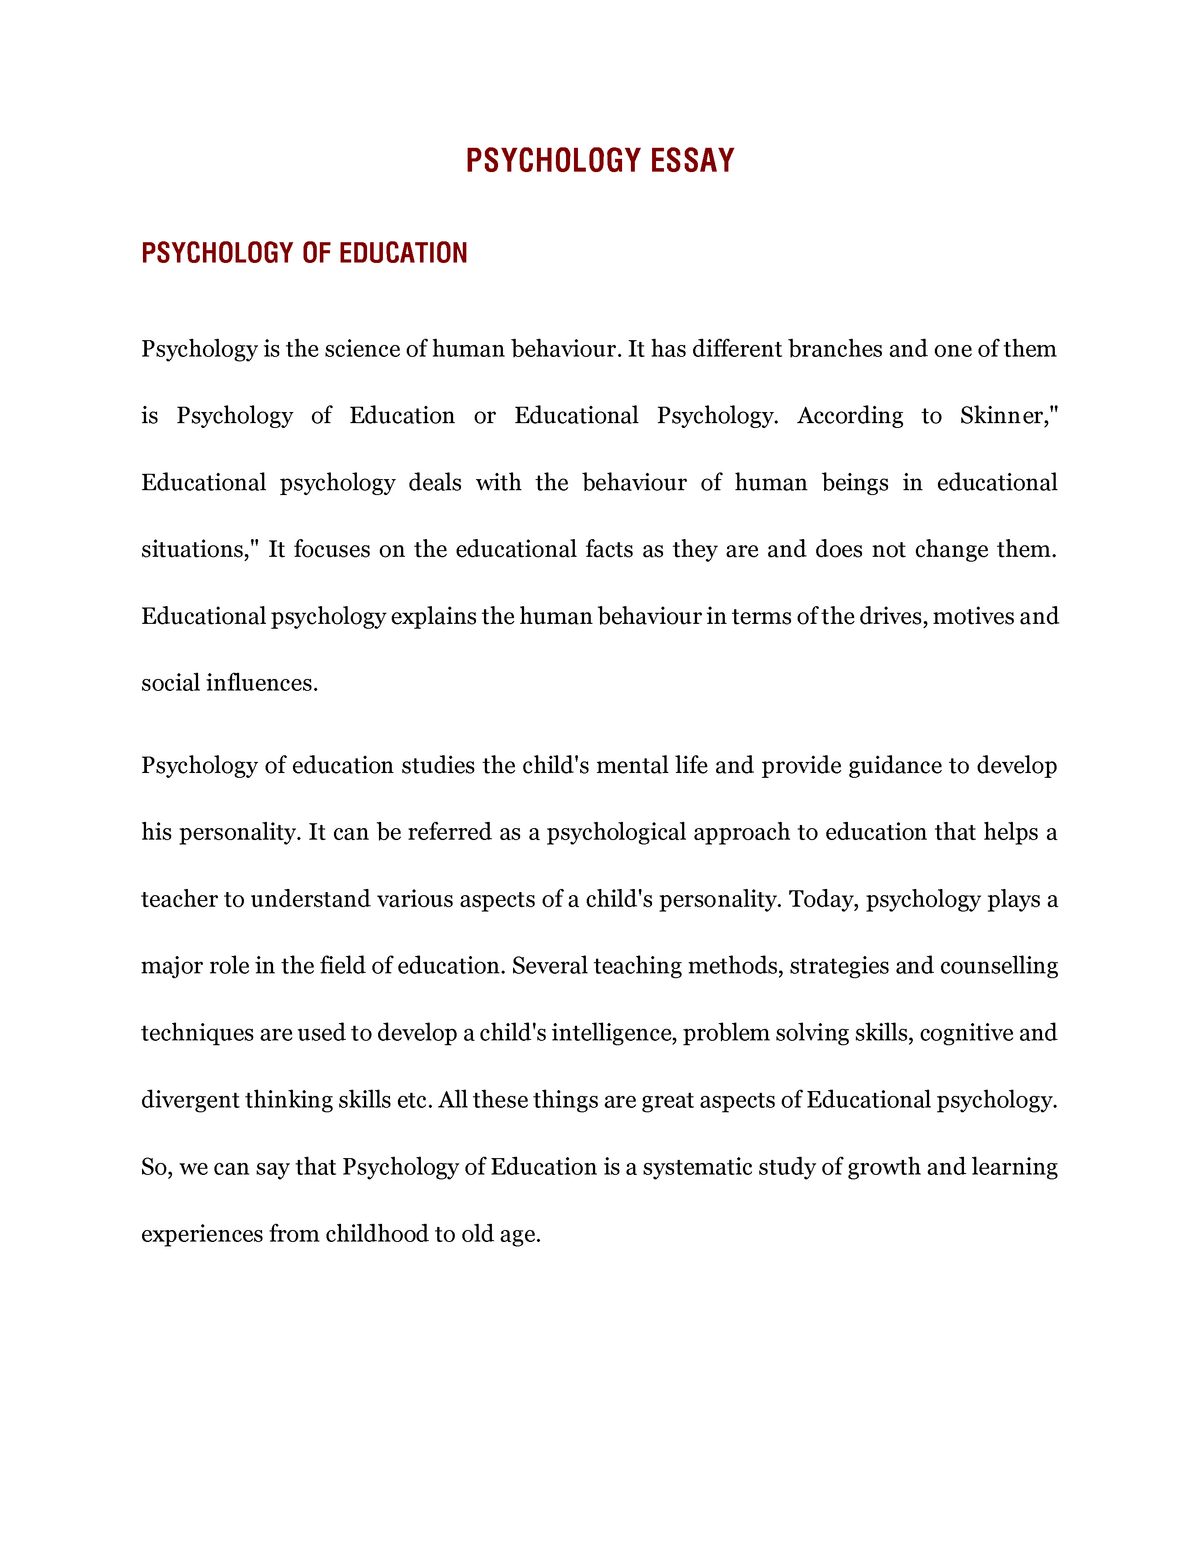 conclusion about psychology of education